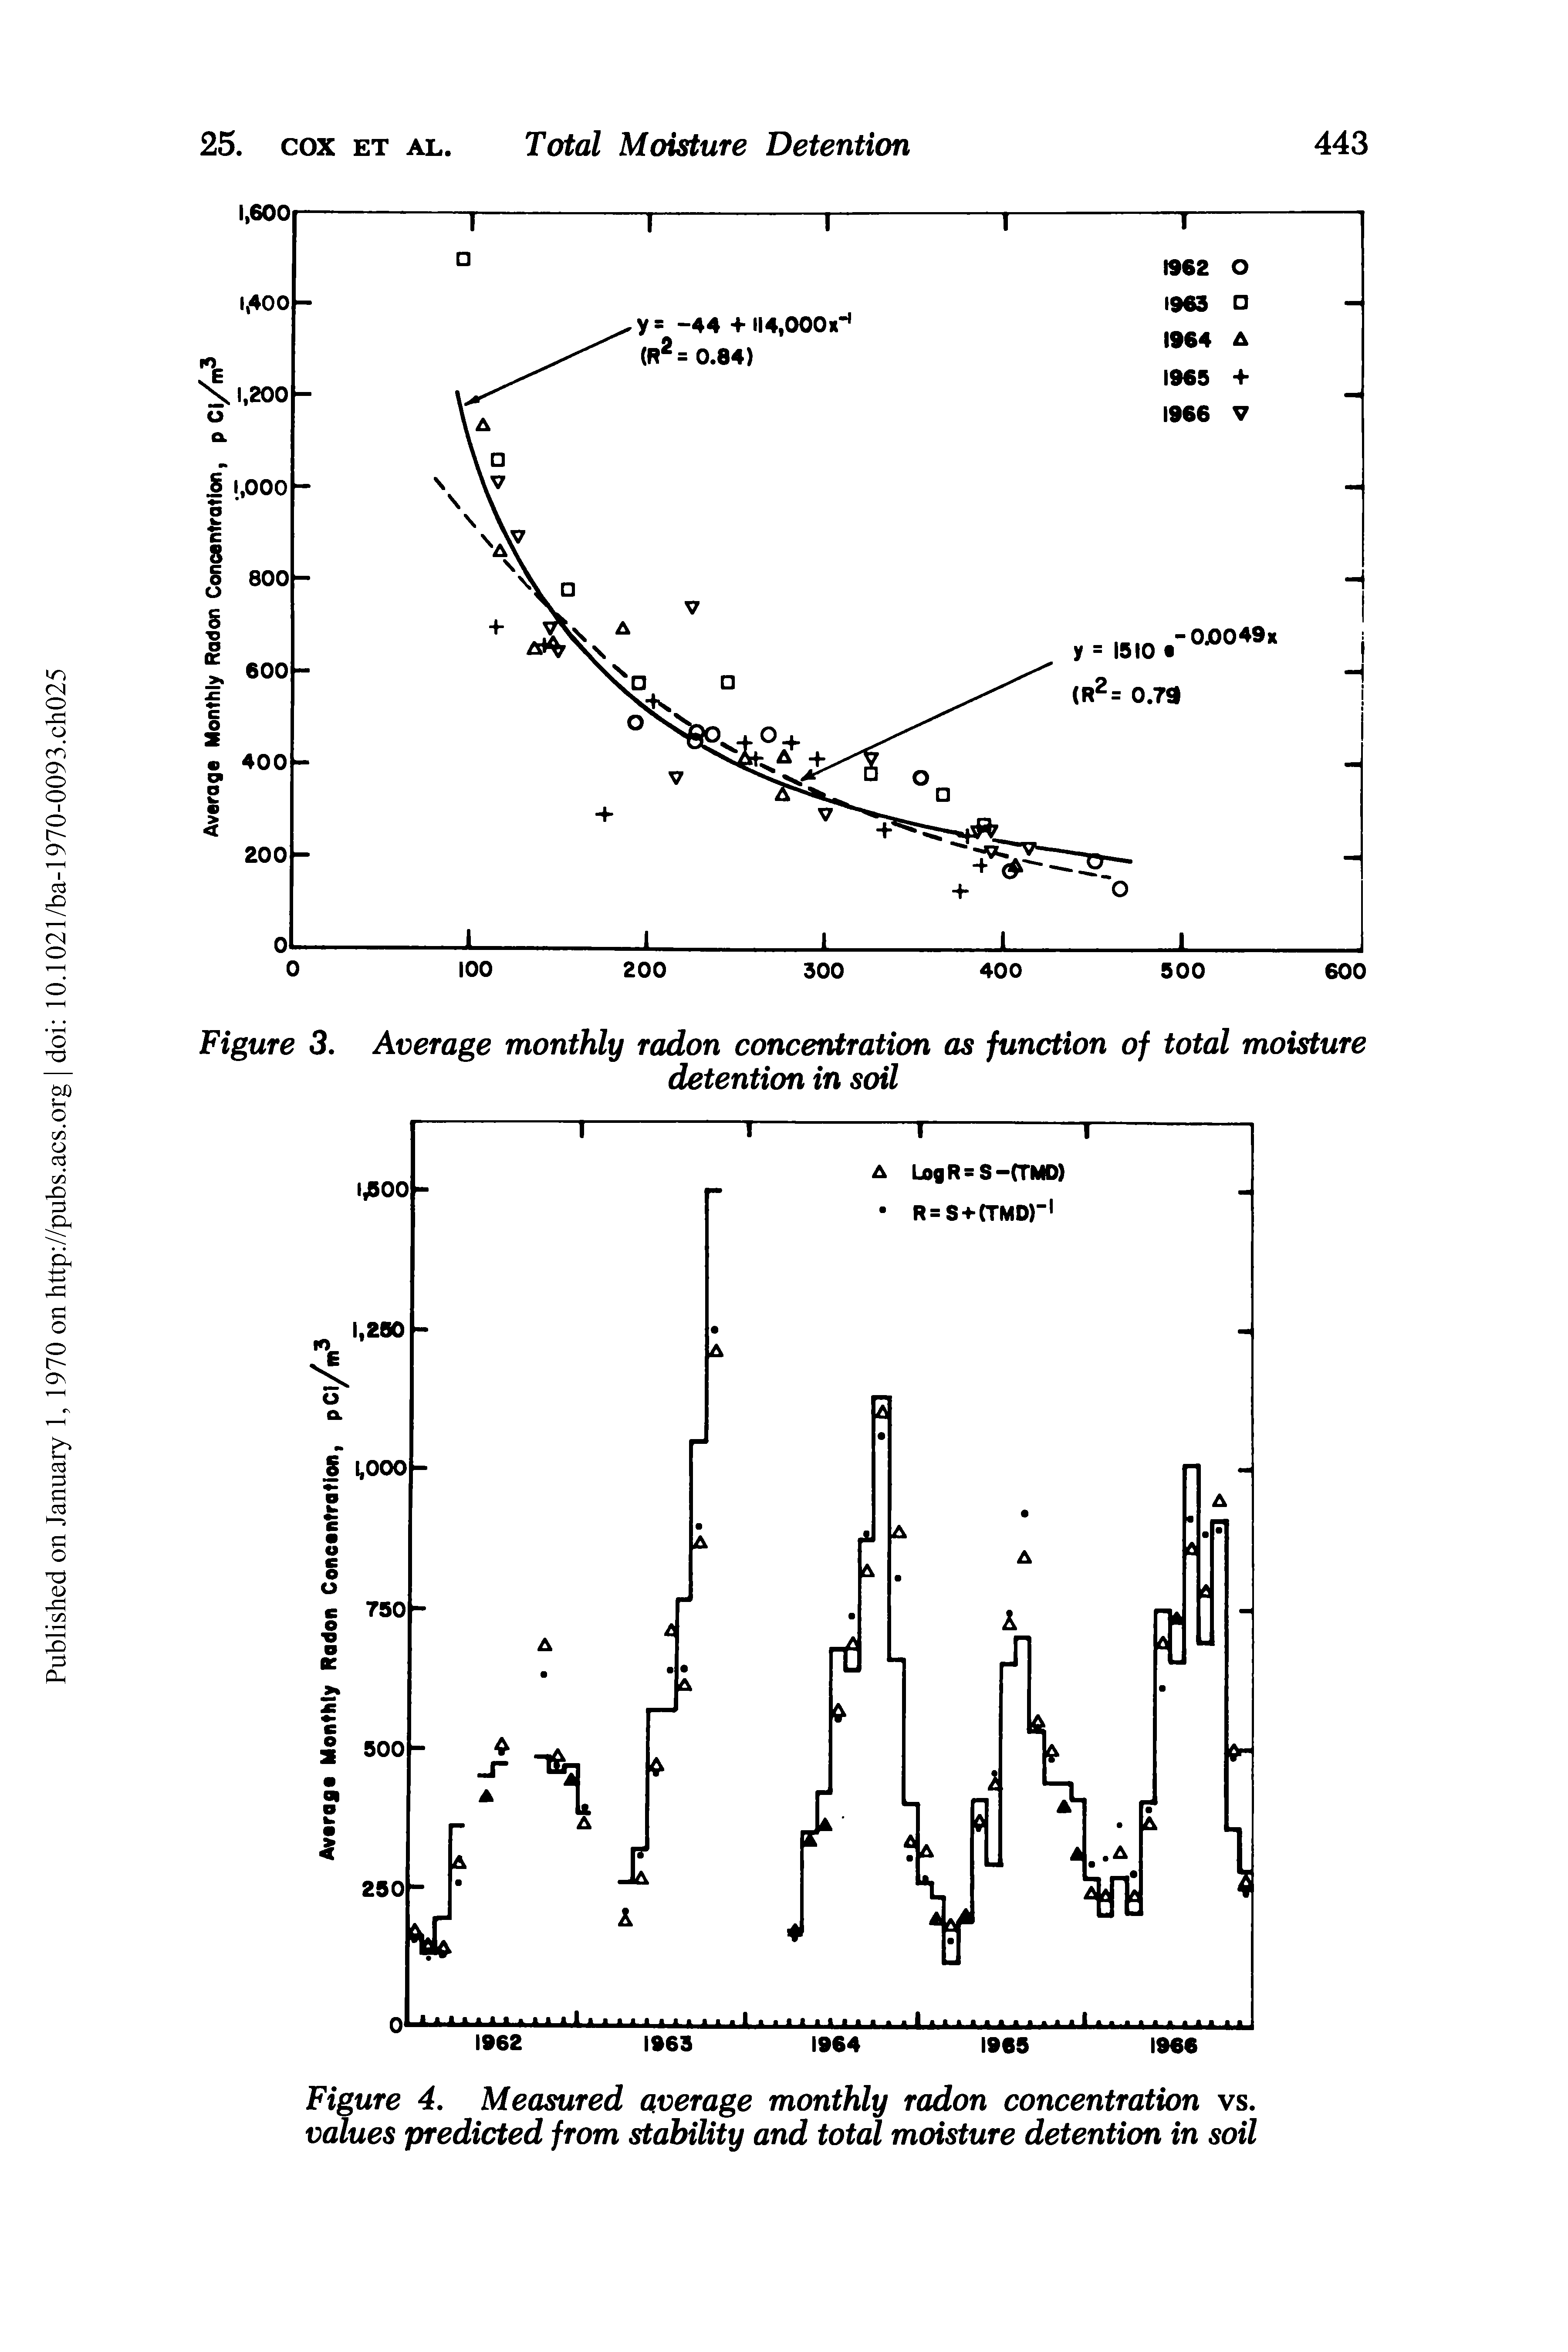 Figure 4. Measured average monthly radon concentration vs. values predicted from stability and total moisture detention in soil...